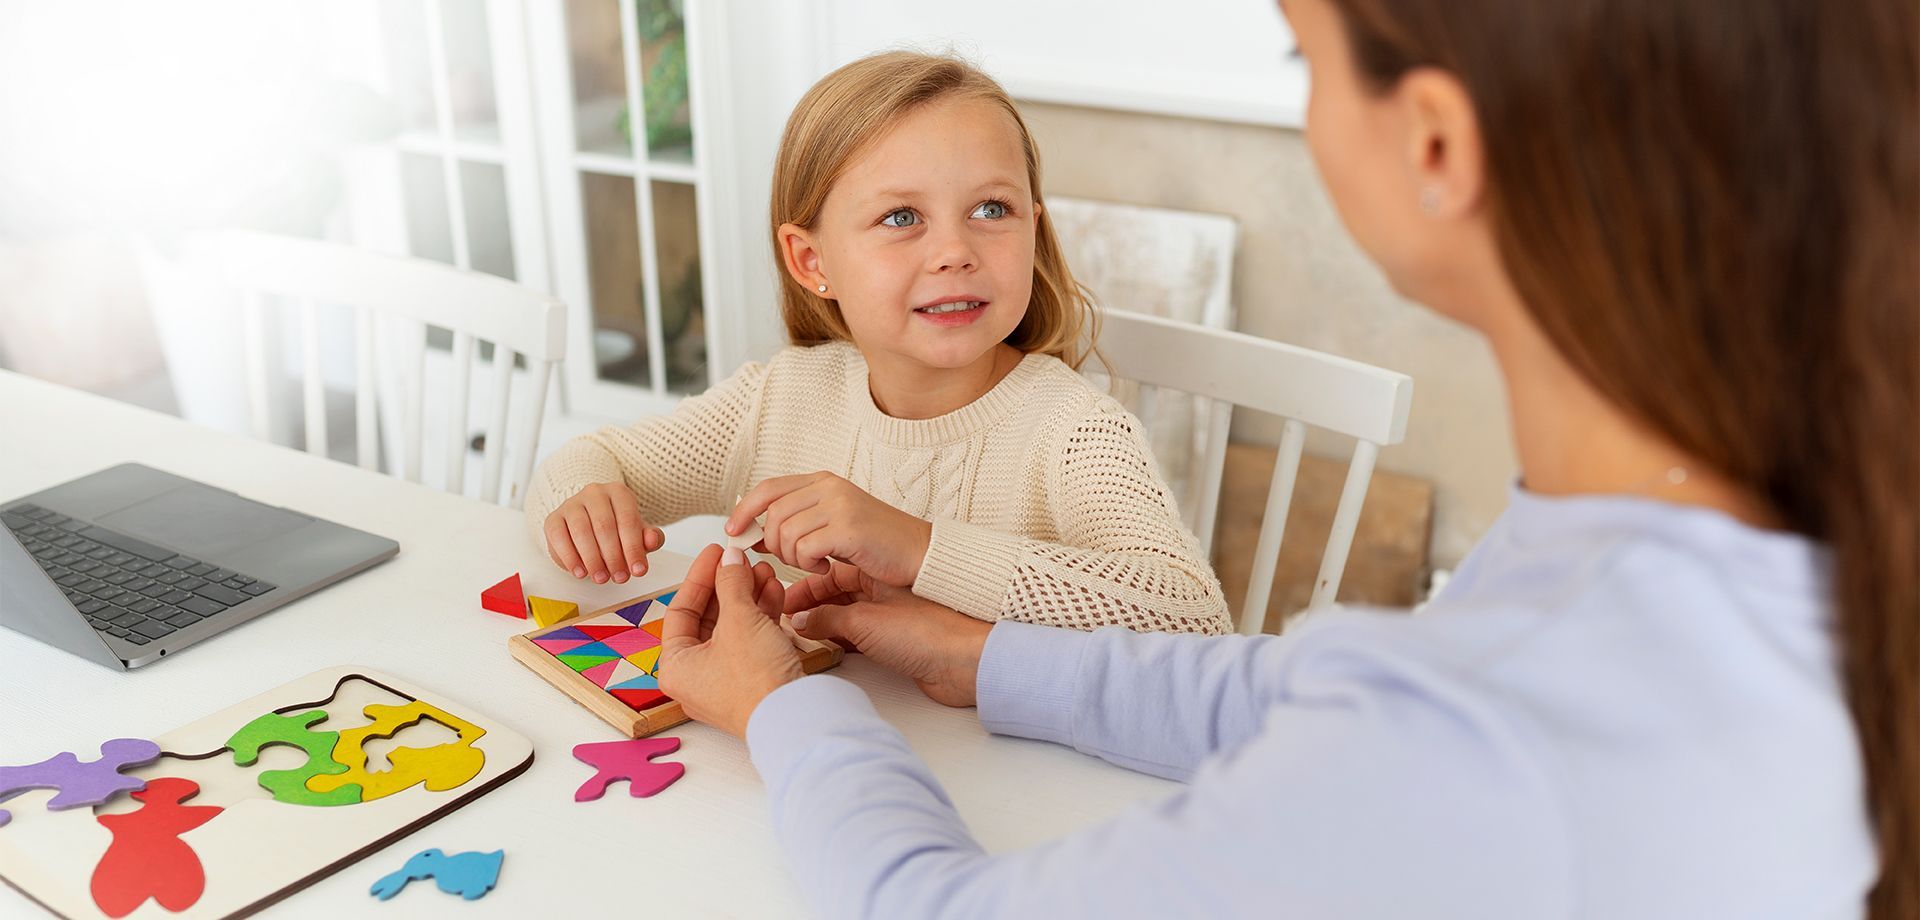 A woman and a little girl sitting at a table playing with puzzles.